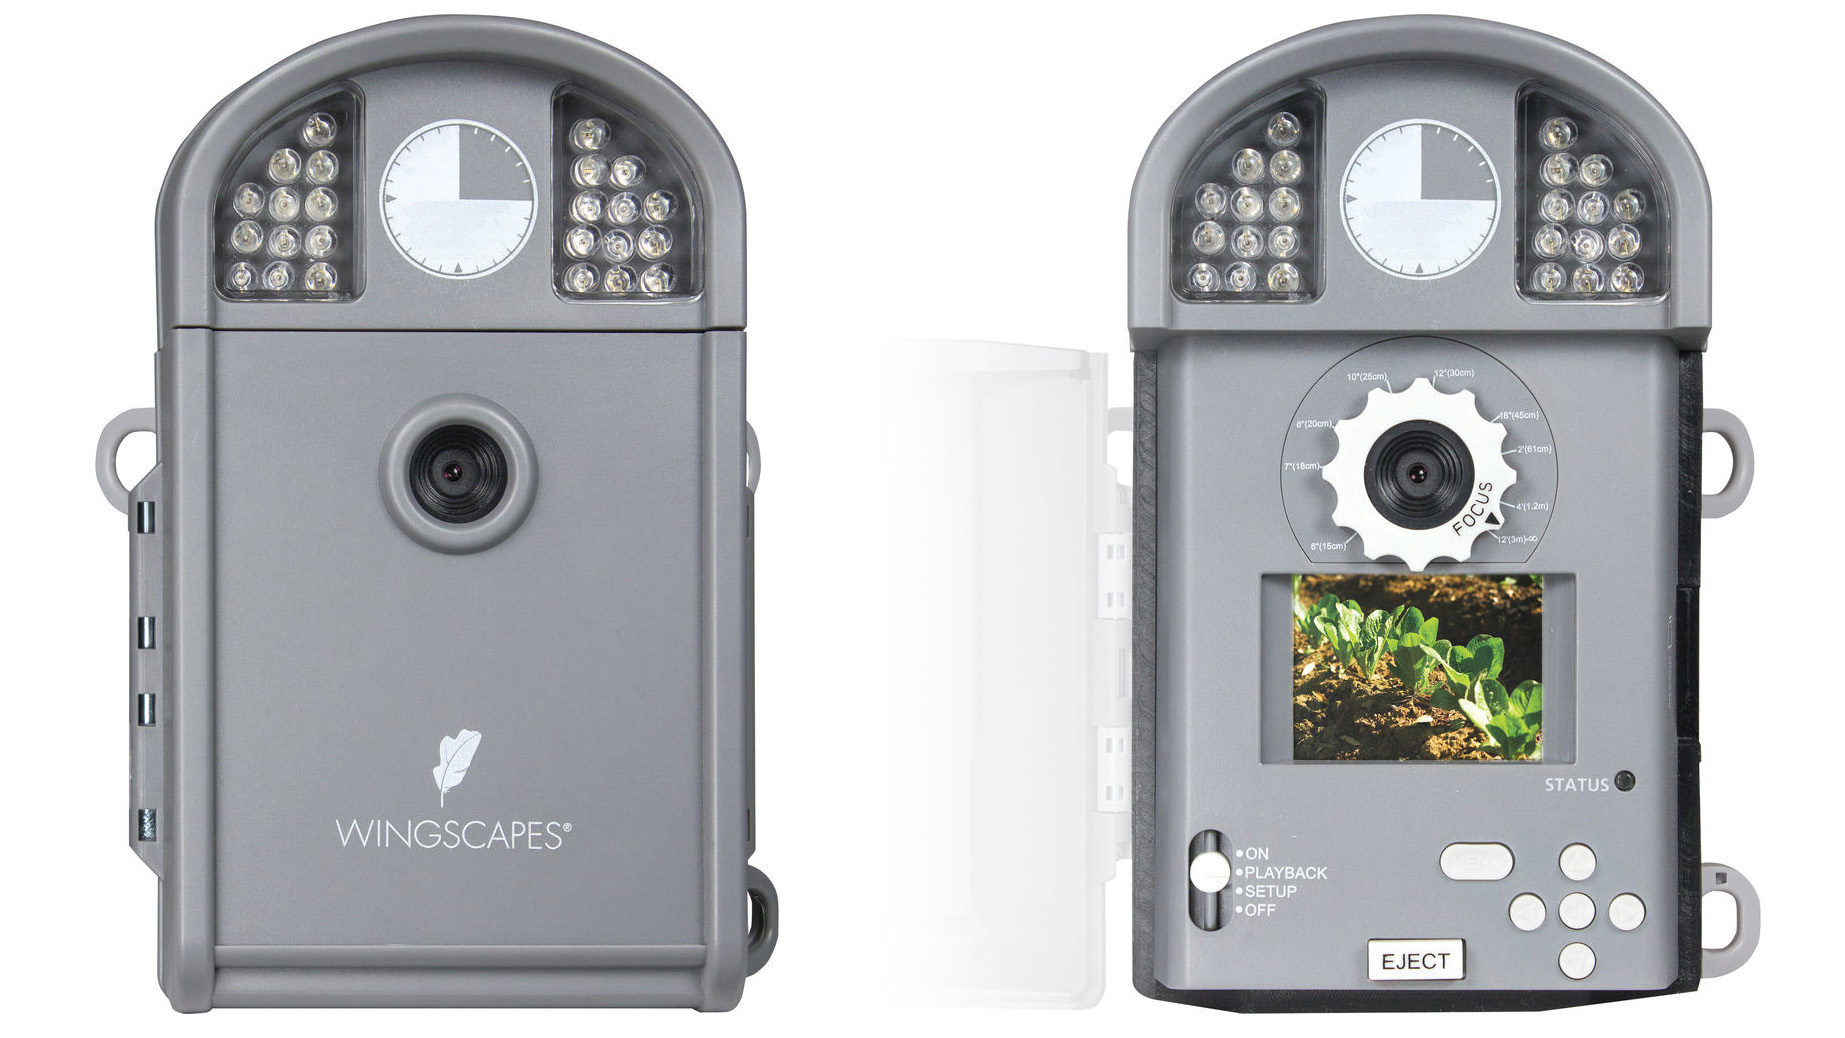 Product shot of the Moultrie Wingscapes TimelapseCam Pro, one of the best timelapse cameras